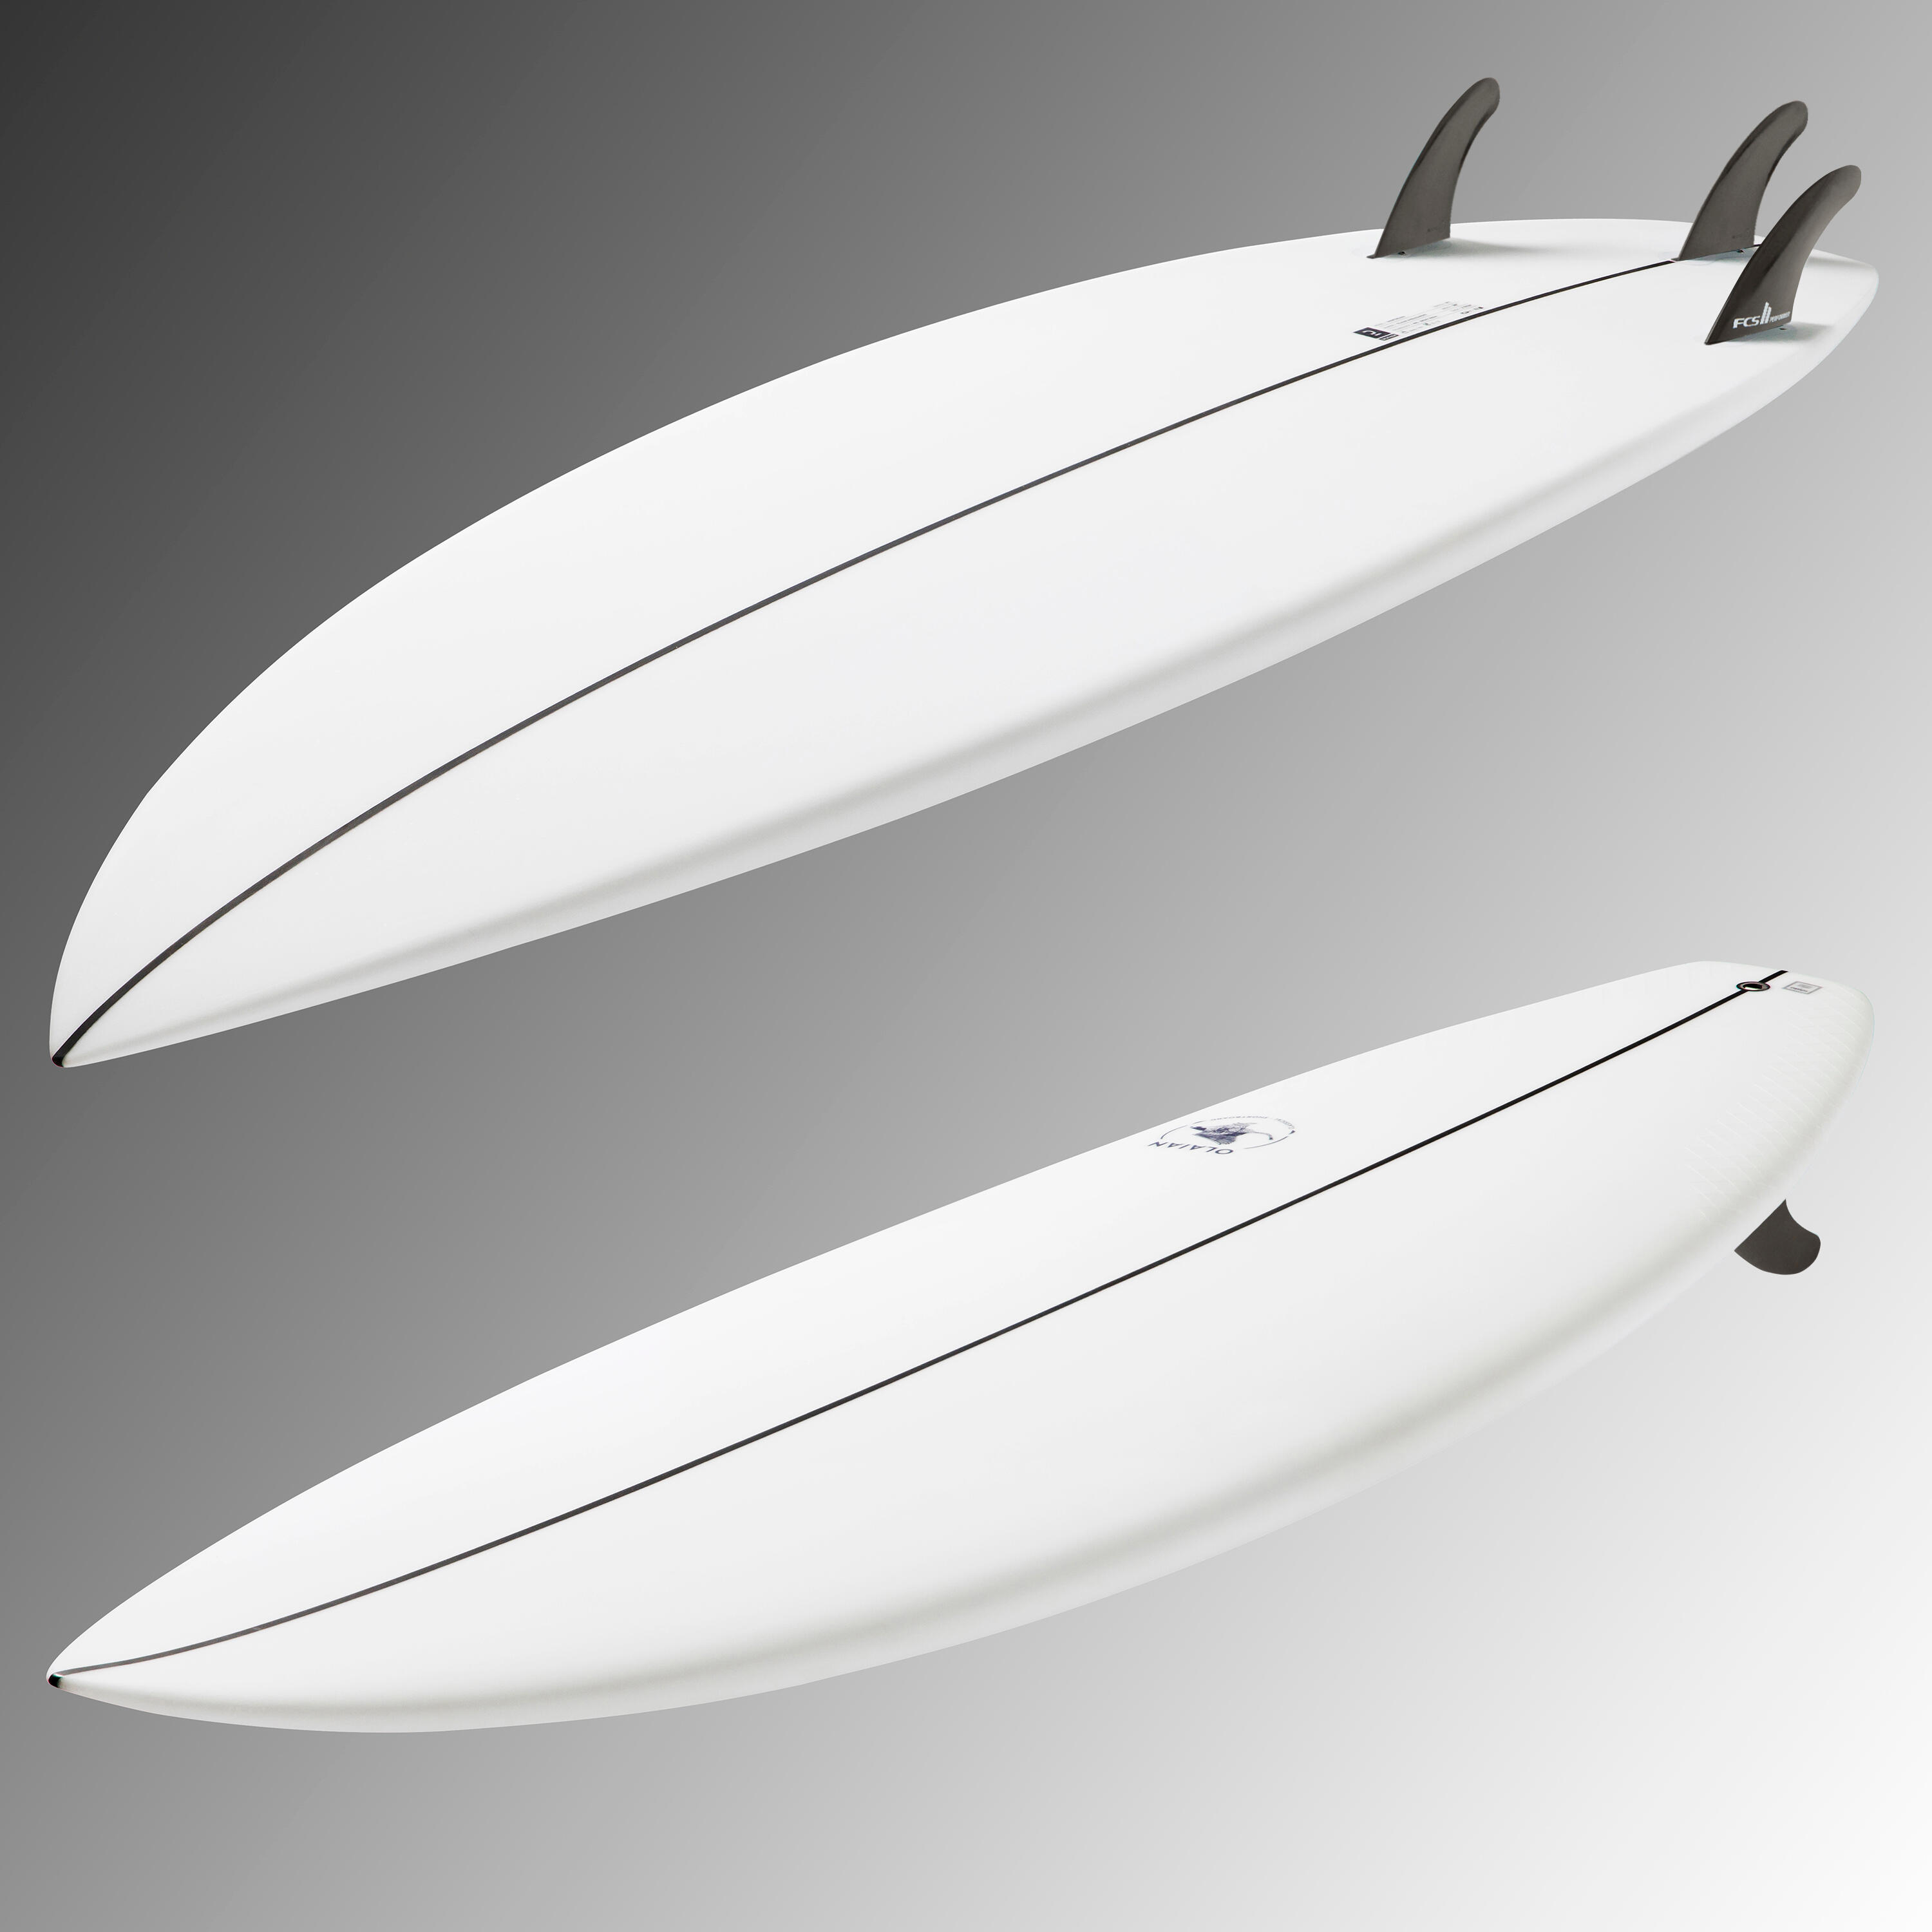 SHORTBOARD 900 6'3" 35 L. Supplied with 3 FCS2 fins 6/13